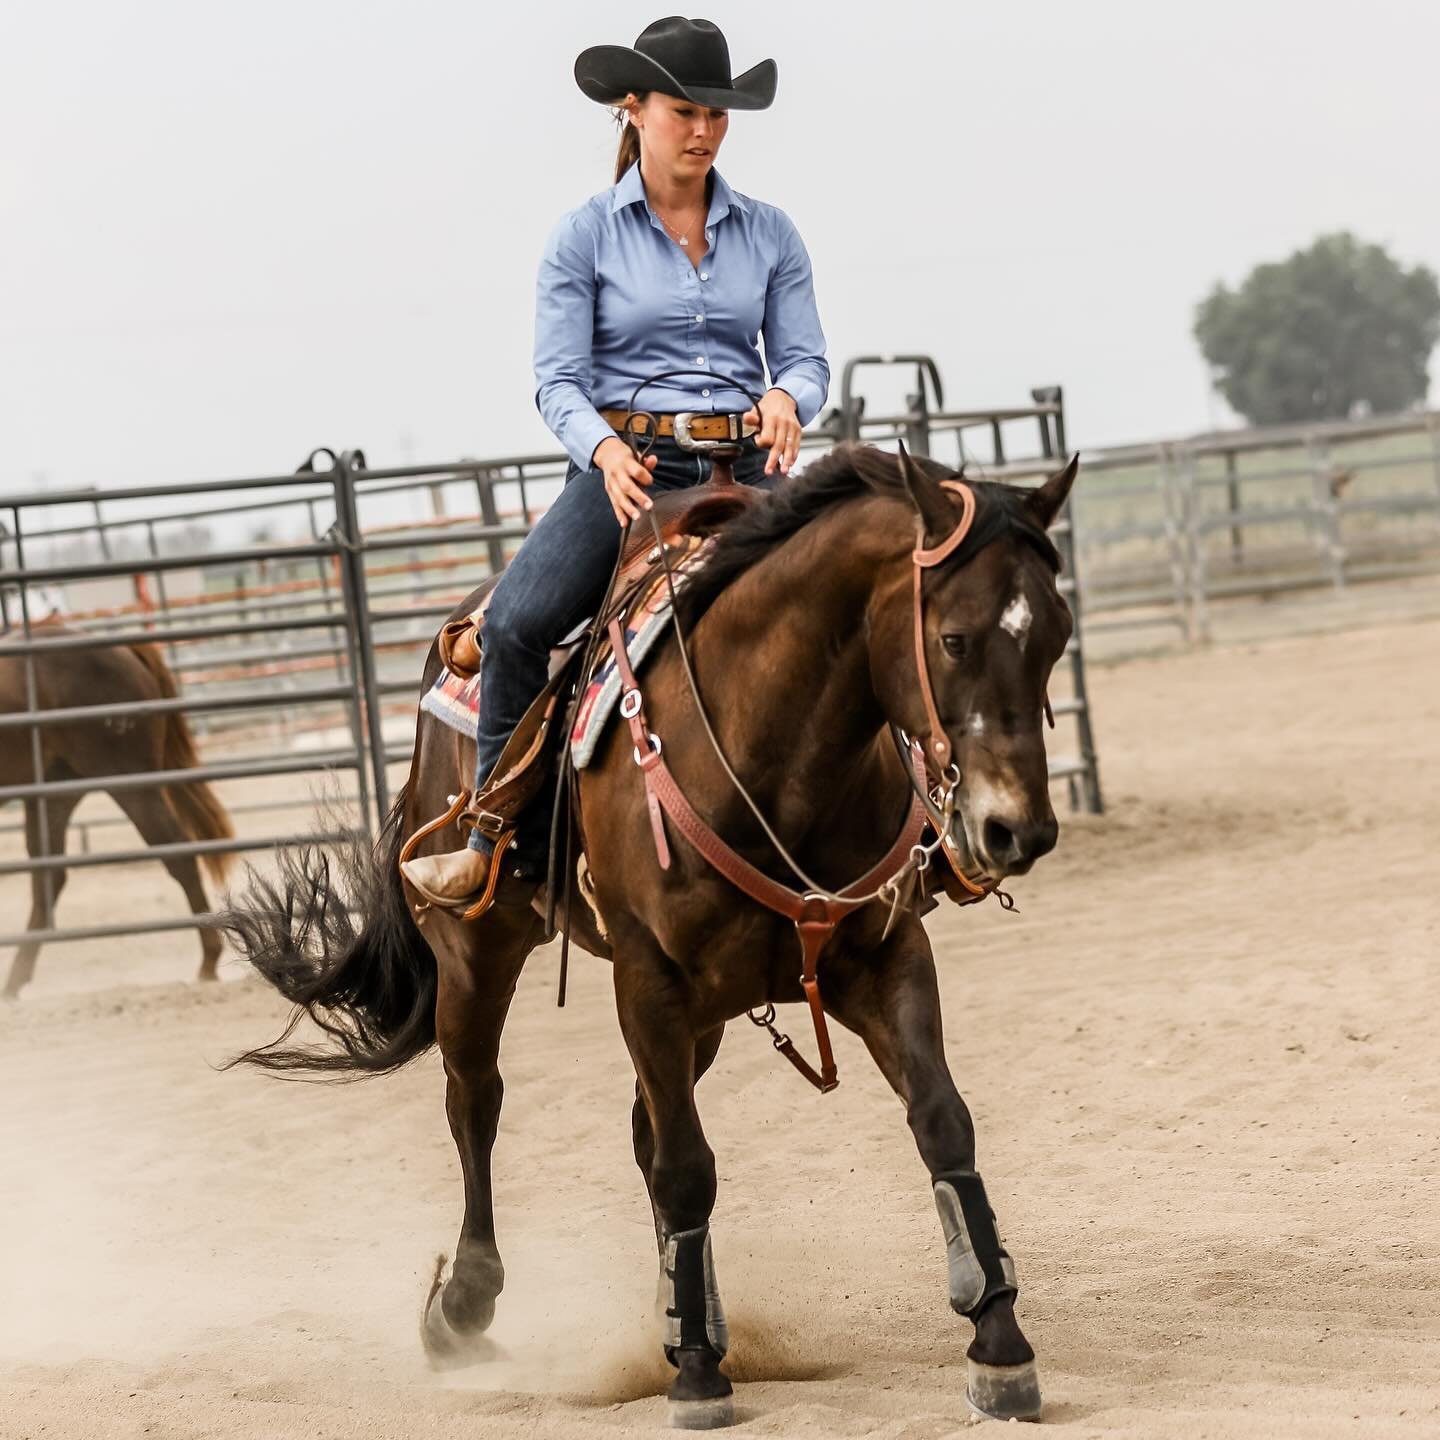 .

SITTING VS. SURVIVING THE STOP

Physical weaknesses create bad habits that hinder riders' ability to cue &amp; respond timely regardless of the discipline. One common issue is bracing through the stop instead of clearly asking for &amp; quietly si